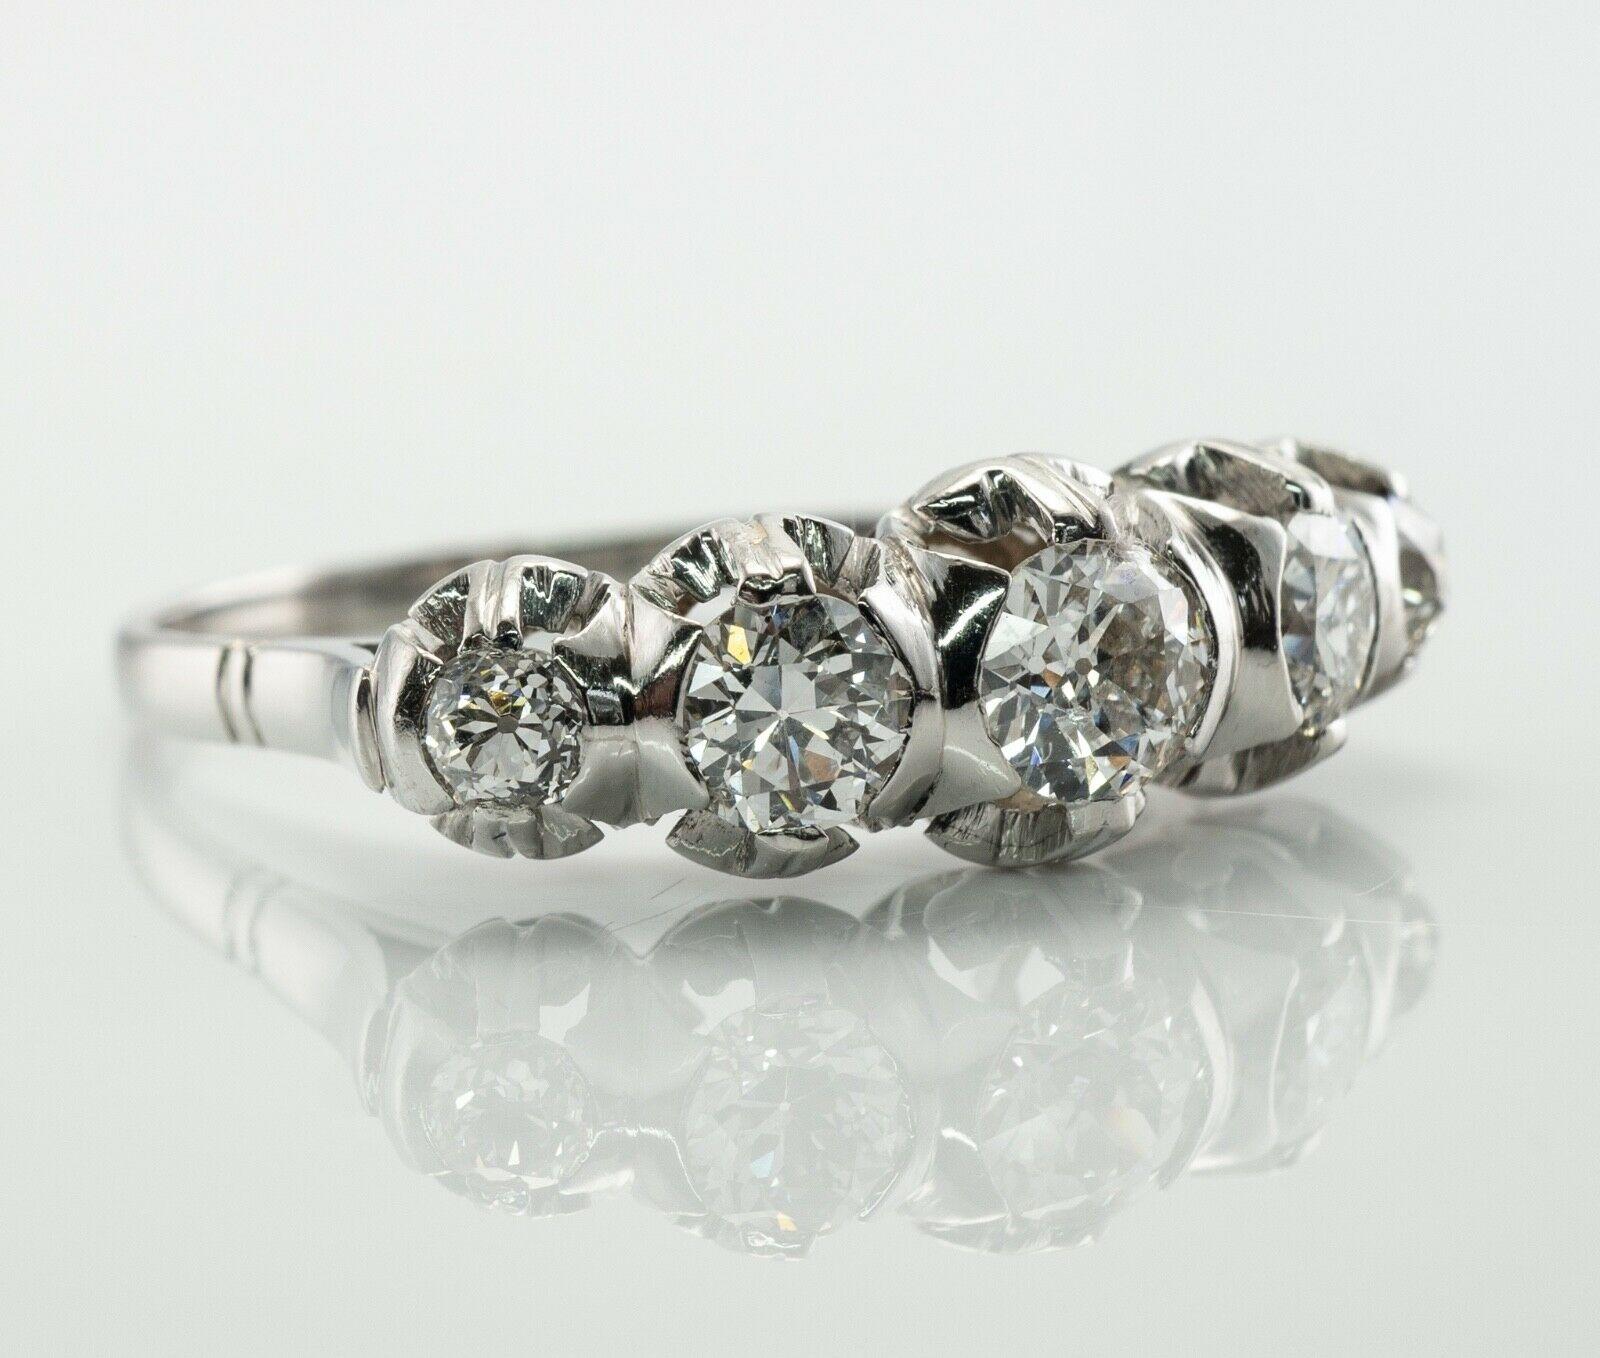 This gorgeous vintage circa 1930s ring is finely crafted in luxury Platinum (carefully tested and guaranteed) and set with old mine cut diamonds. The center diamond is .50 carat, two gems are .30 carat each, end side diamonds are .15 carat each. The